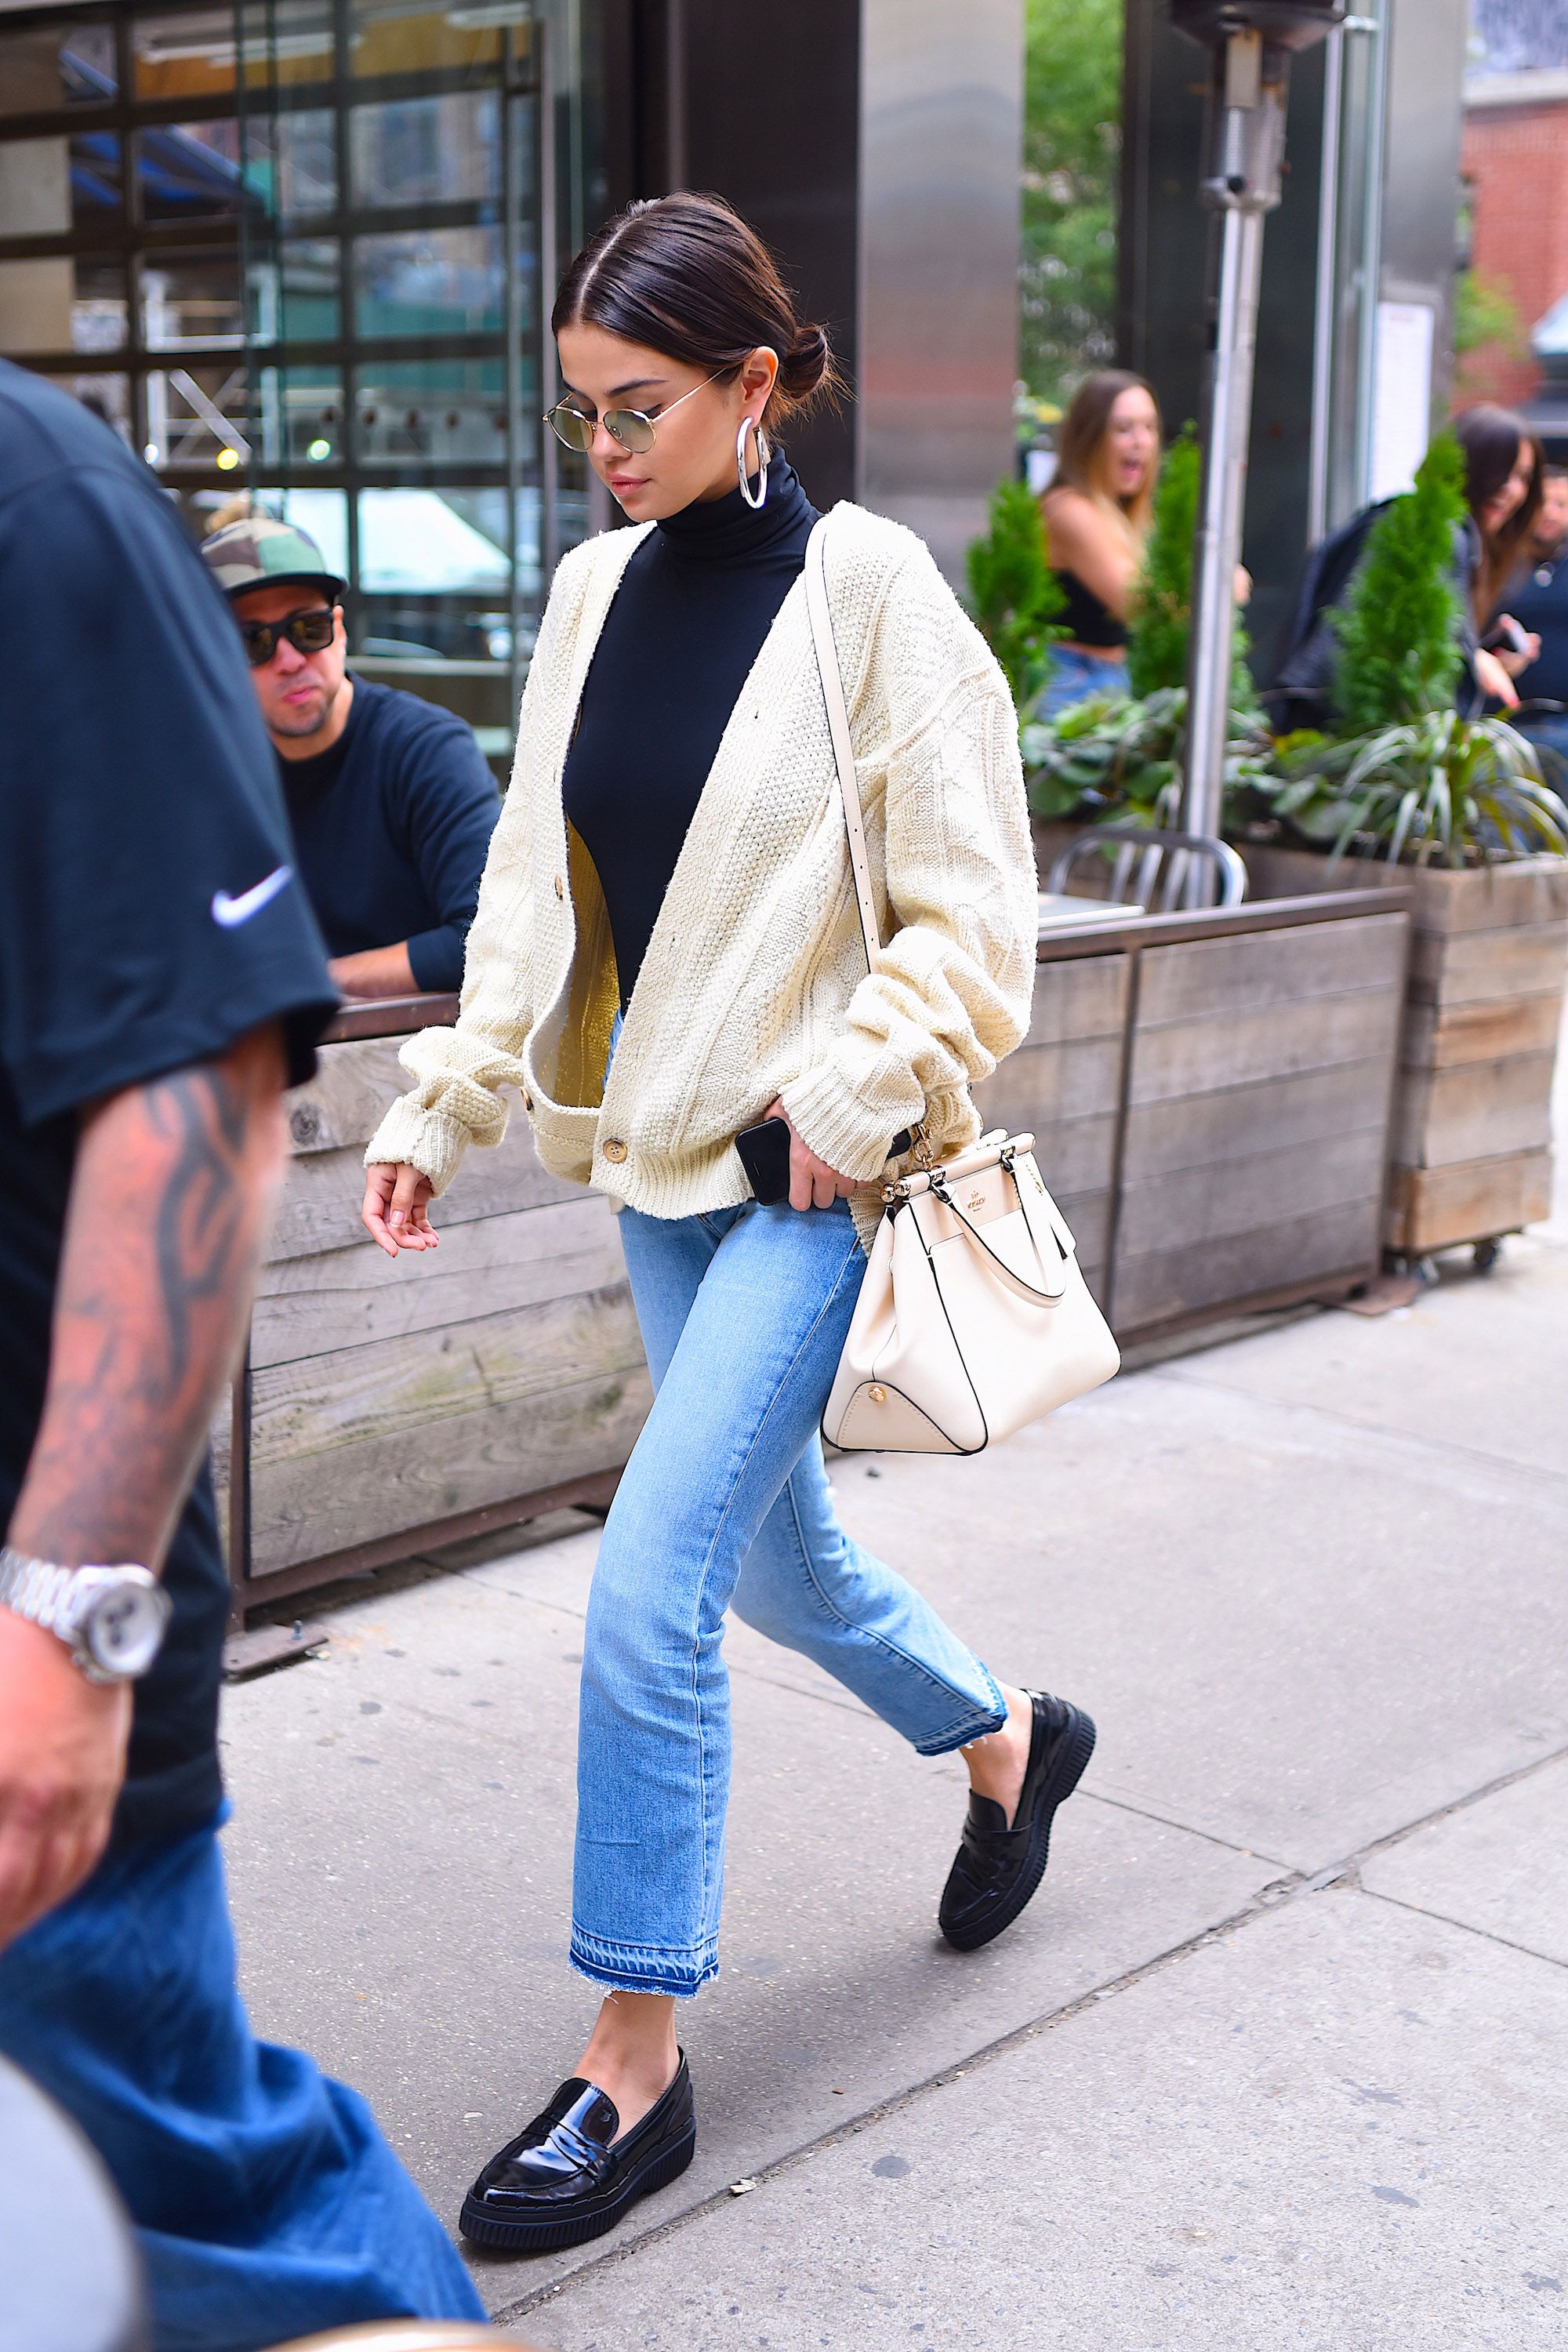 How to Dress Like a Celebrity -15 Celebrity Styles & Outfits